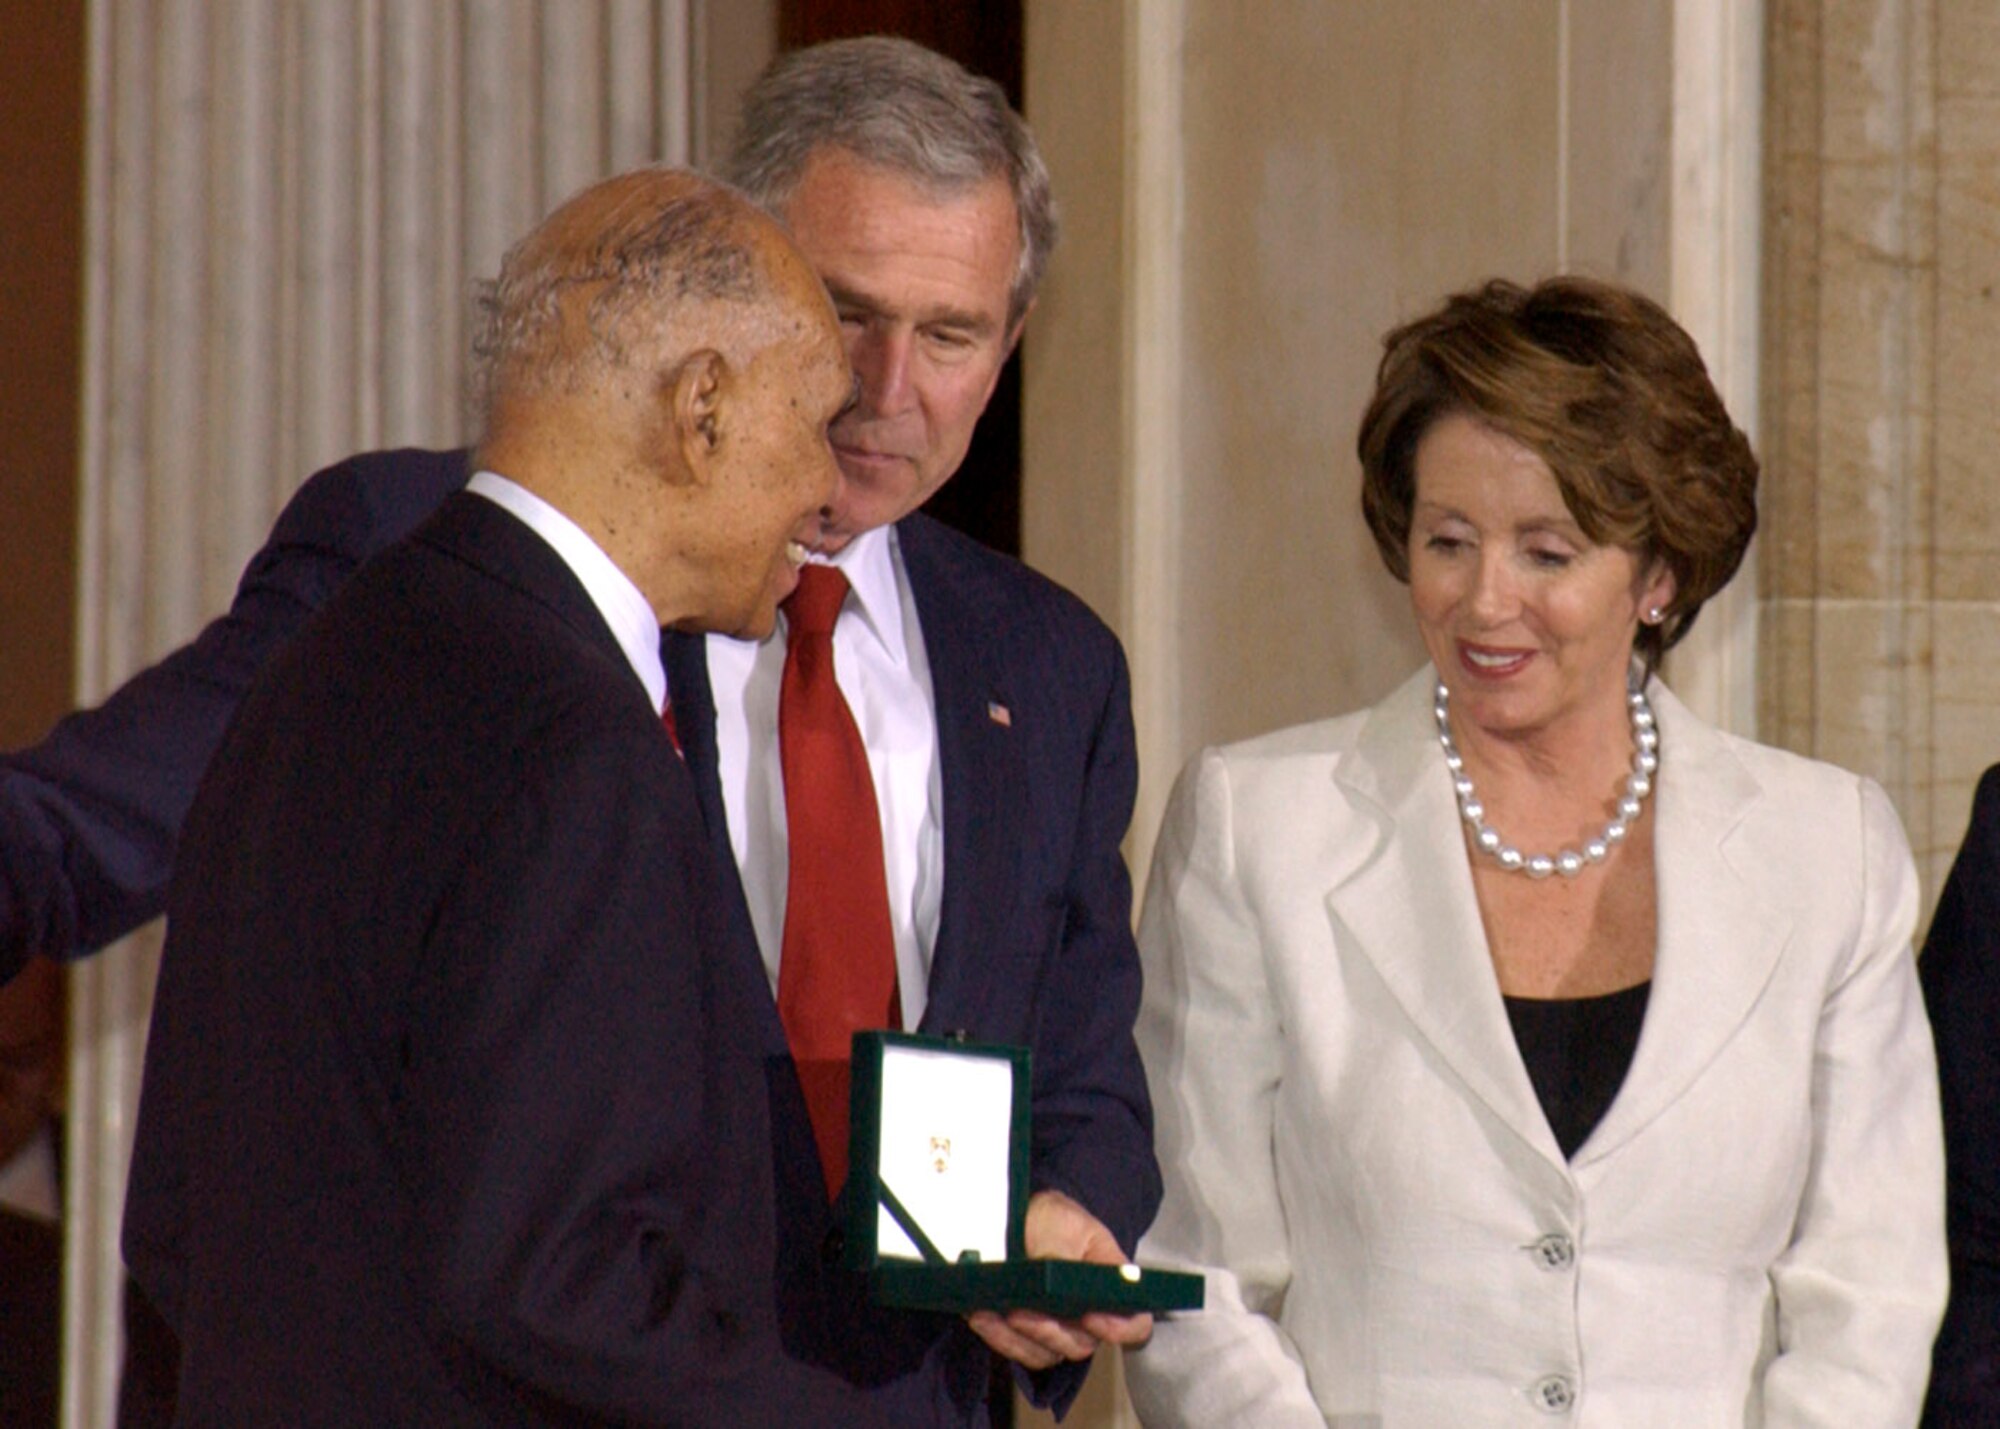 President Bush and Nancy Pelosi, speaker of the U.S. House of Representatives, present Tuskegee Airman Dr. Roscoe Brown Jr. with the Congressional Gold Medal, Congress' most distinguished award. Dr. Brown, along with five other Tuskegee Airmen, accepted the award on behalf of the more than 300 Airmen in attendance at the ceremony. (U.S. Air Force photo/Faith Harris)  
 
